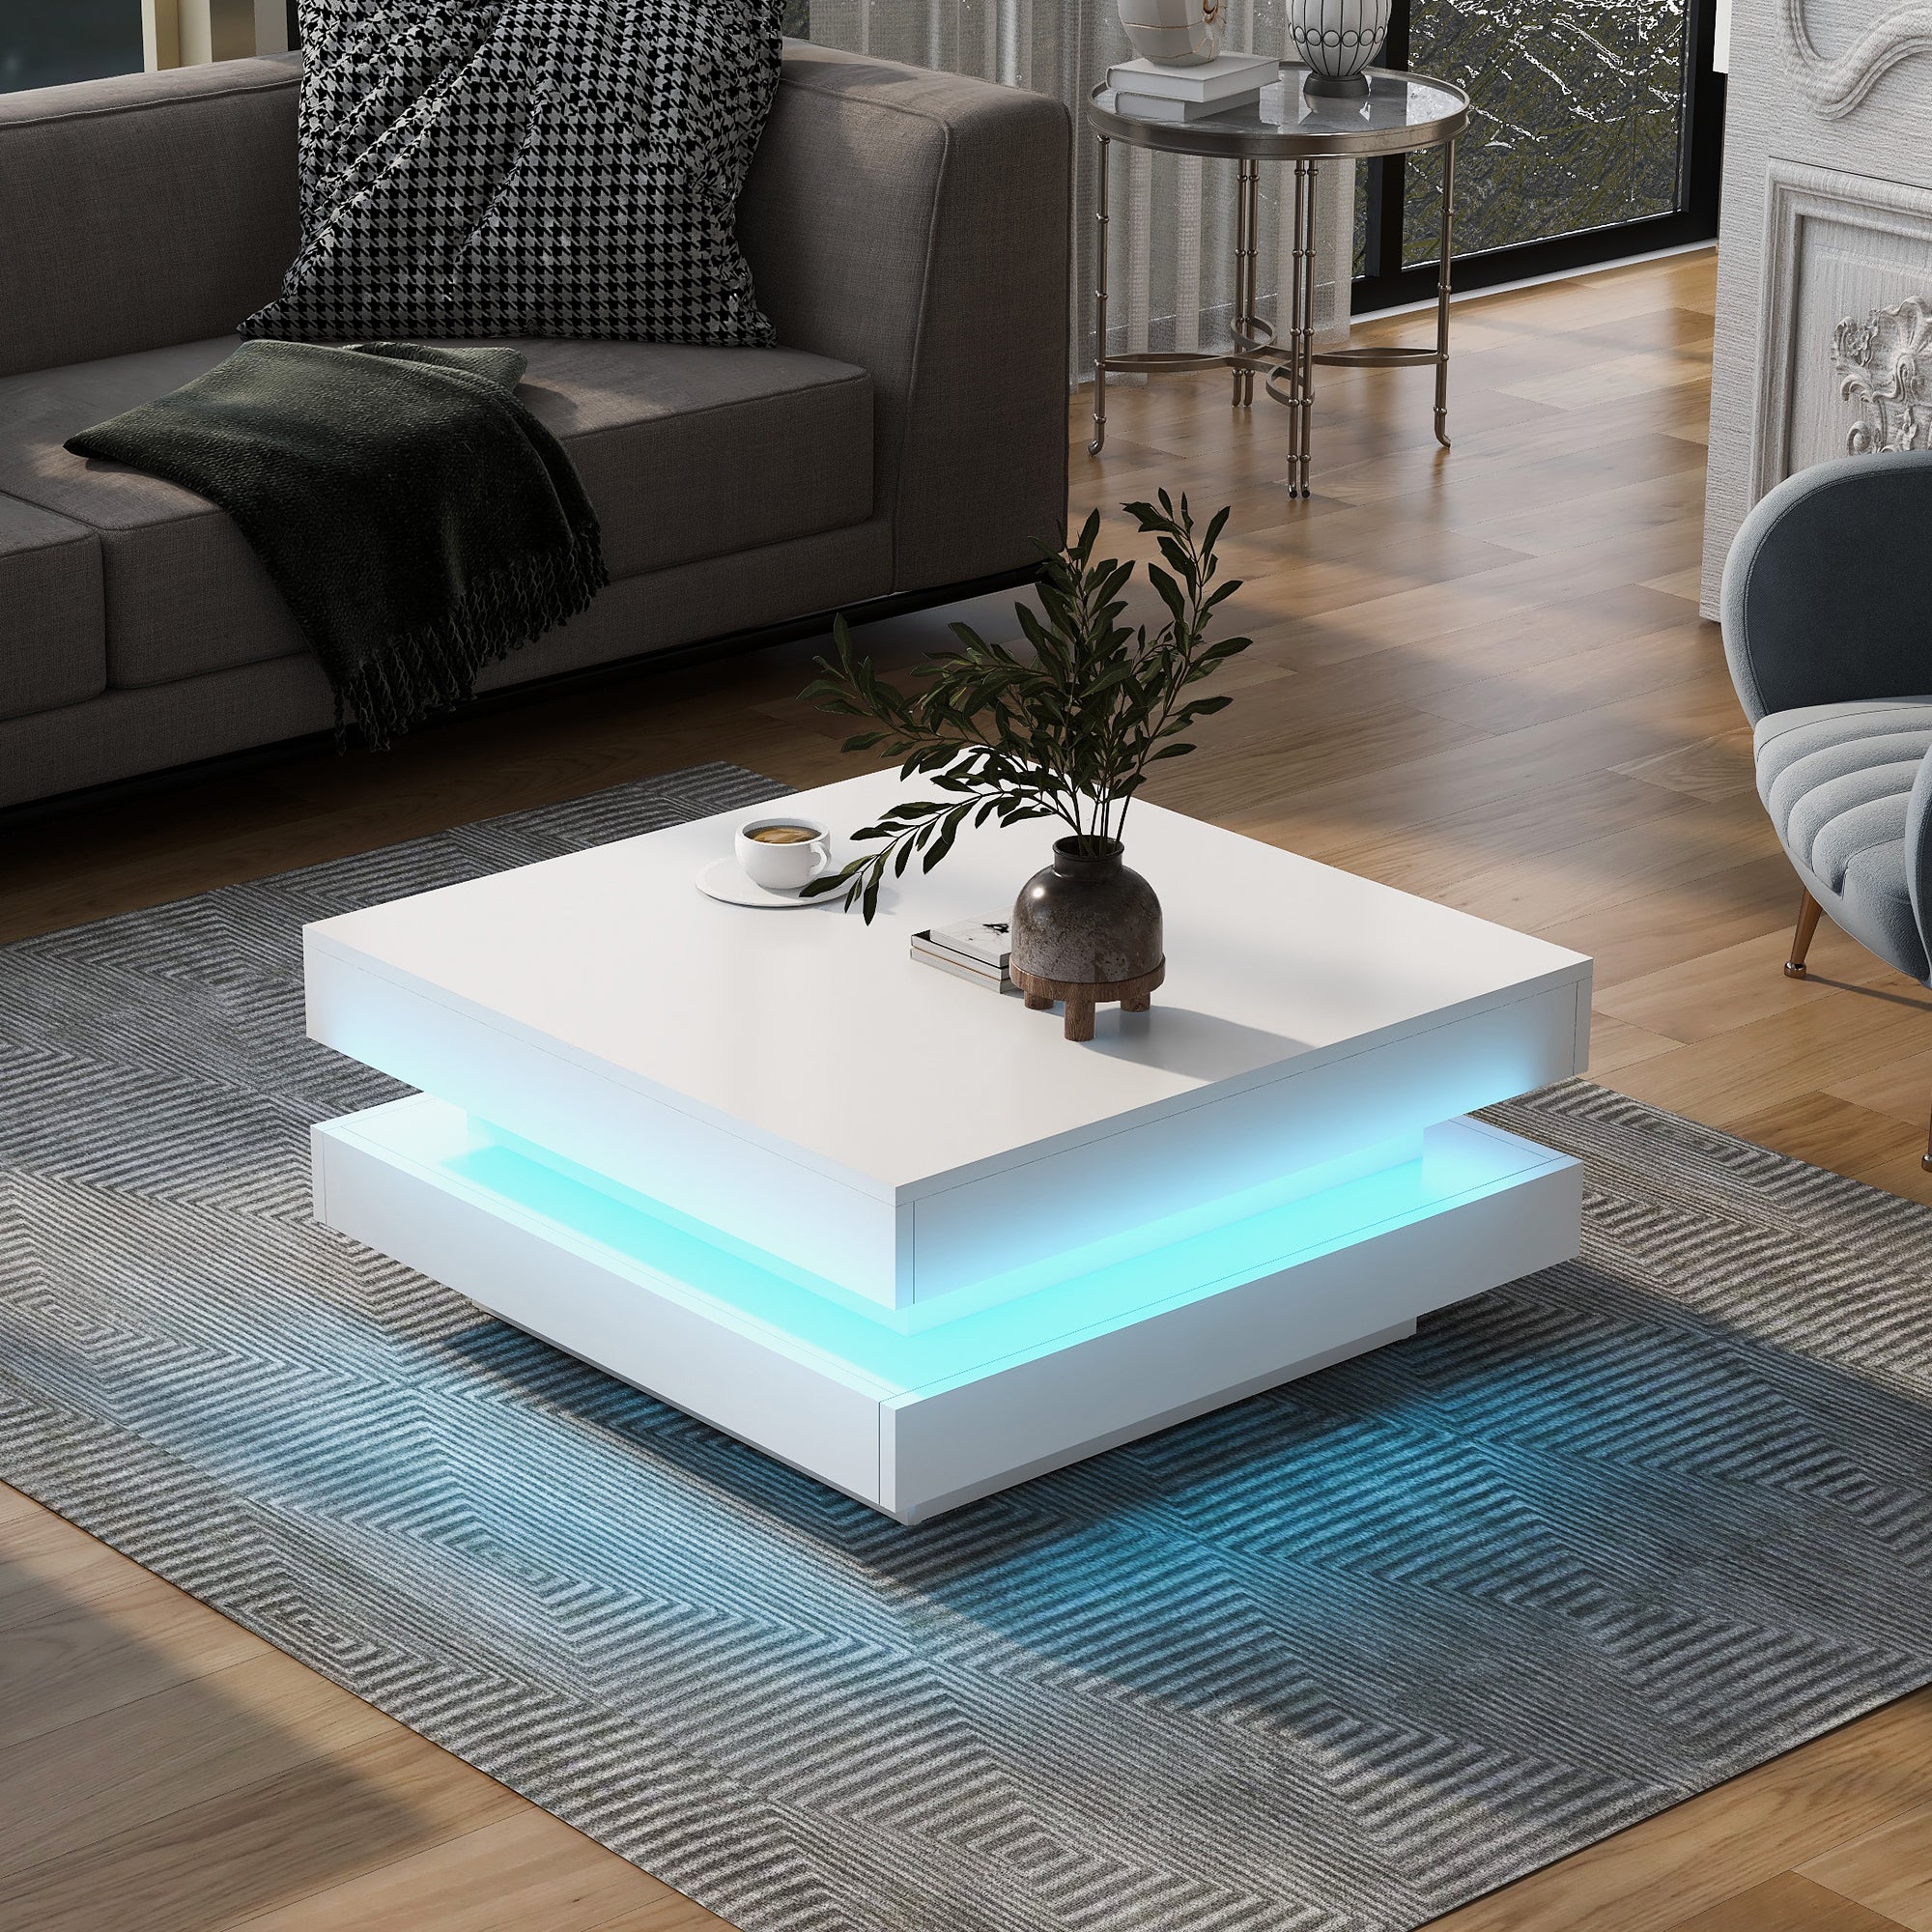 🆓🚛 2-Tier Square Coffee Table,, High Gloss Minimalist Design With Led Lights, Center Table for Living Room, 31.5''X31.5''X14.2'', White